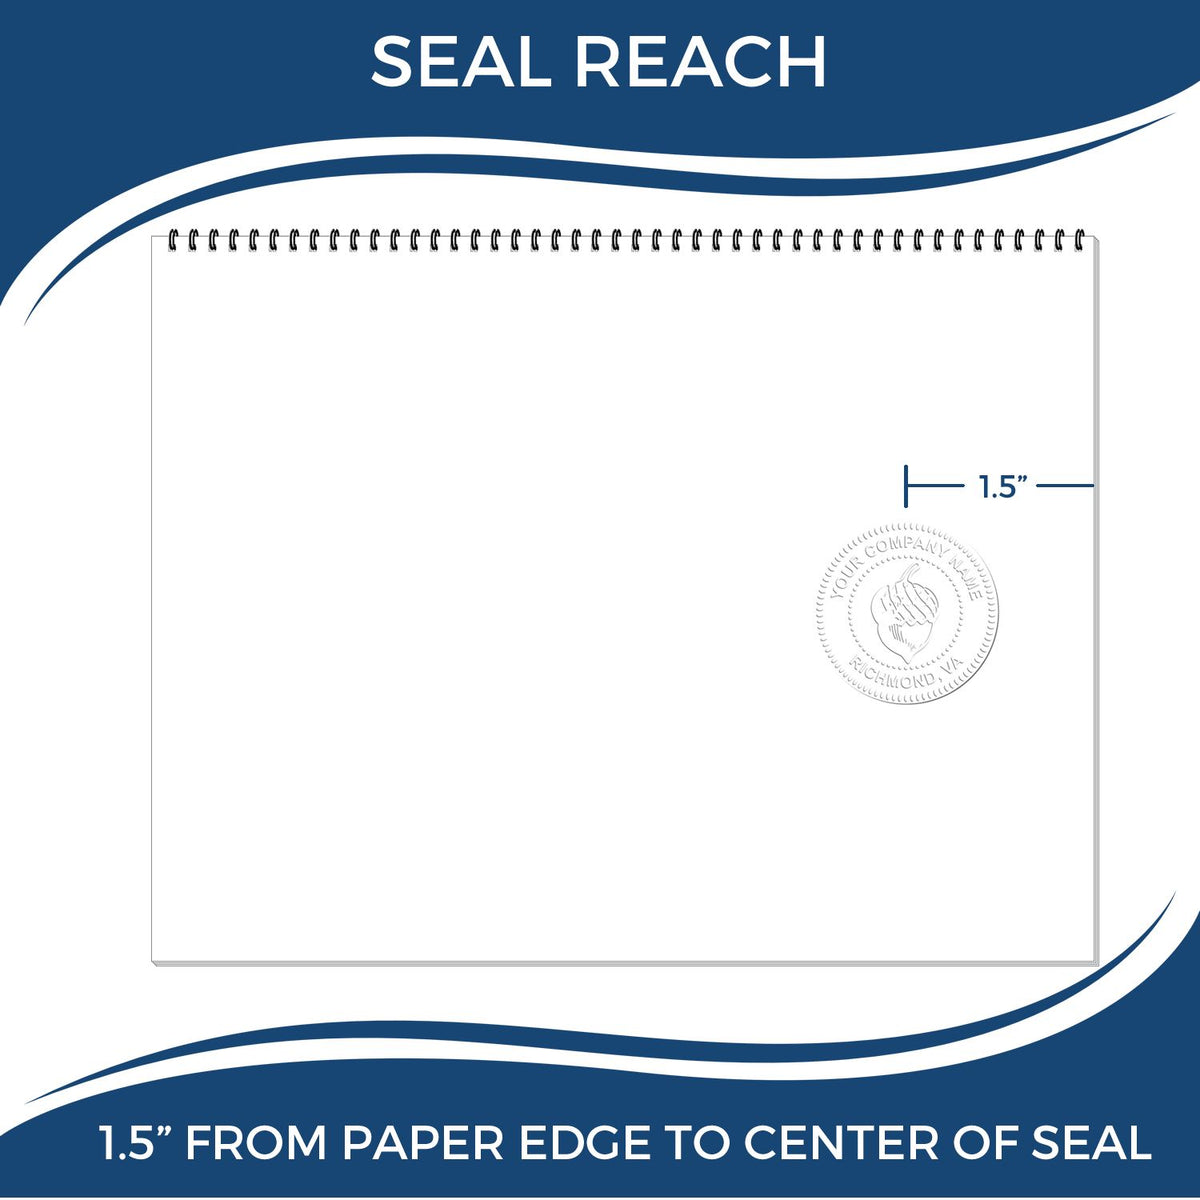 An infographic showing the seal reach which is represented by a ruler and a miniature seal image of the Georgia Desk Architect Embossing Seal